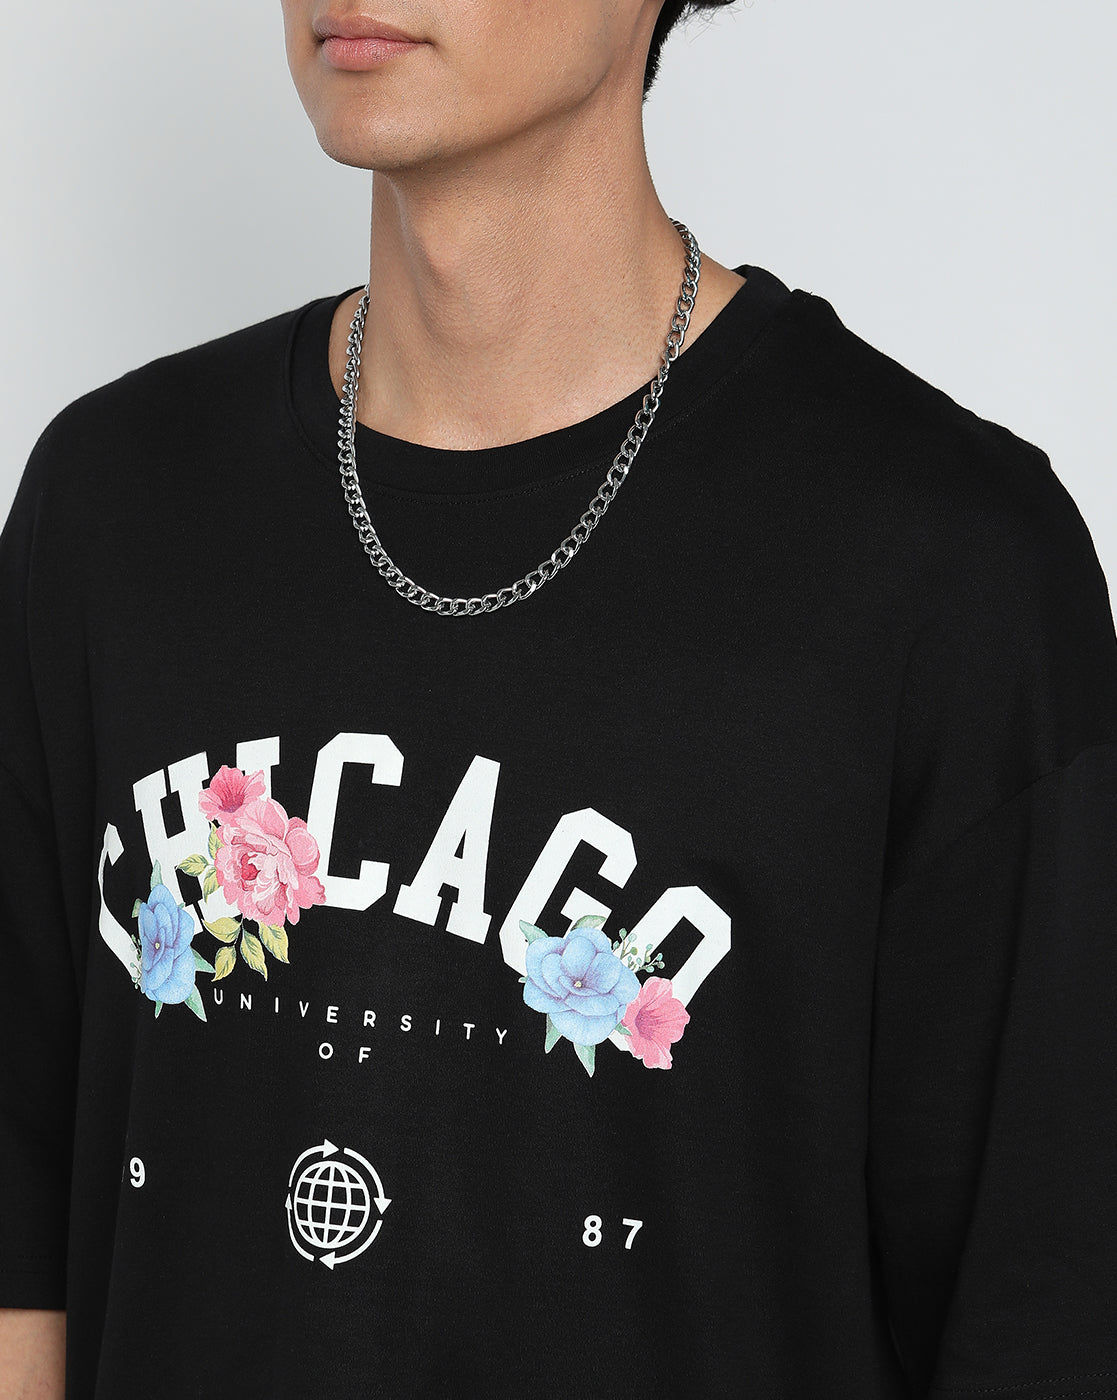 Black Chicago Graphic Printed Oversized Co-ords